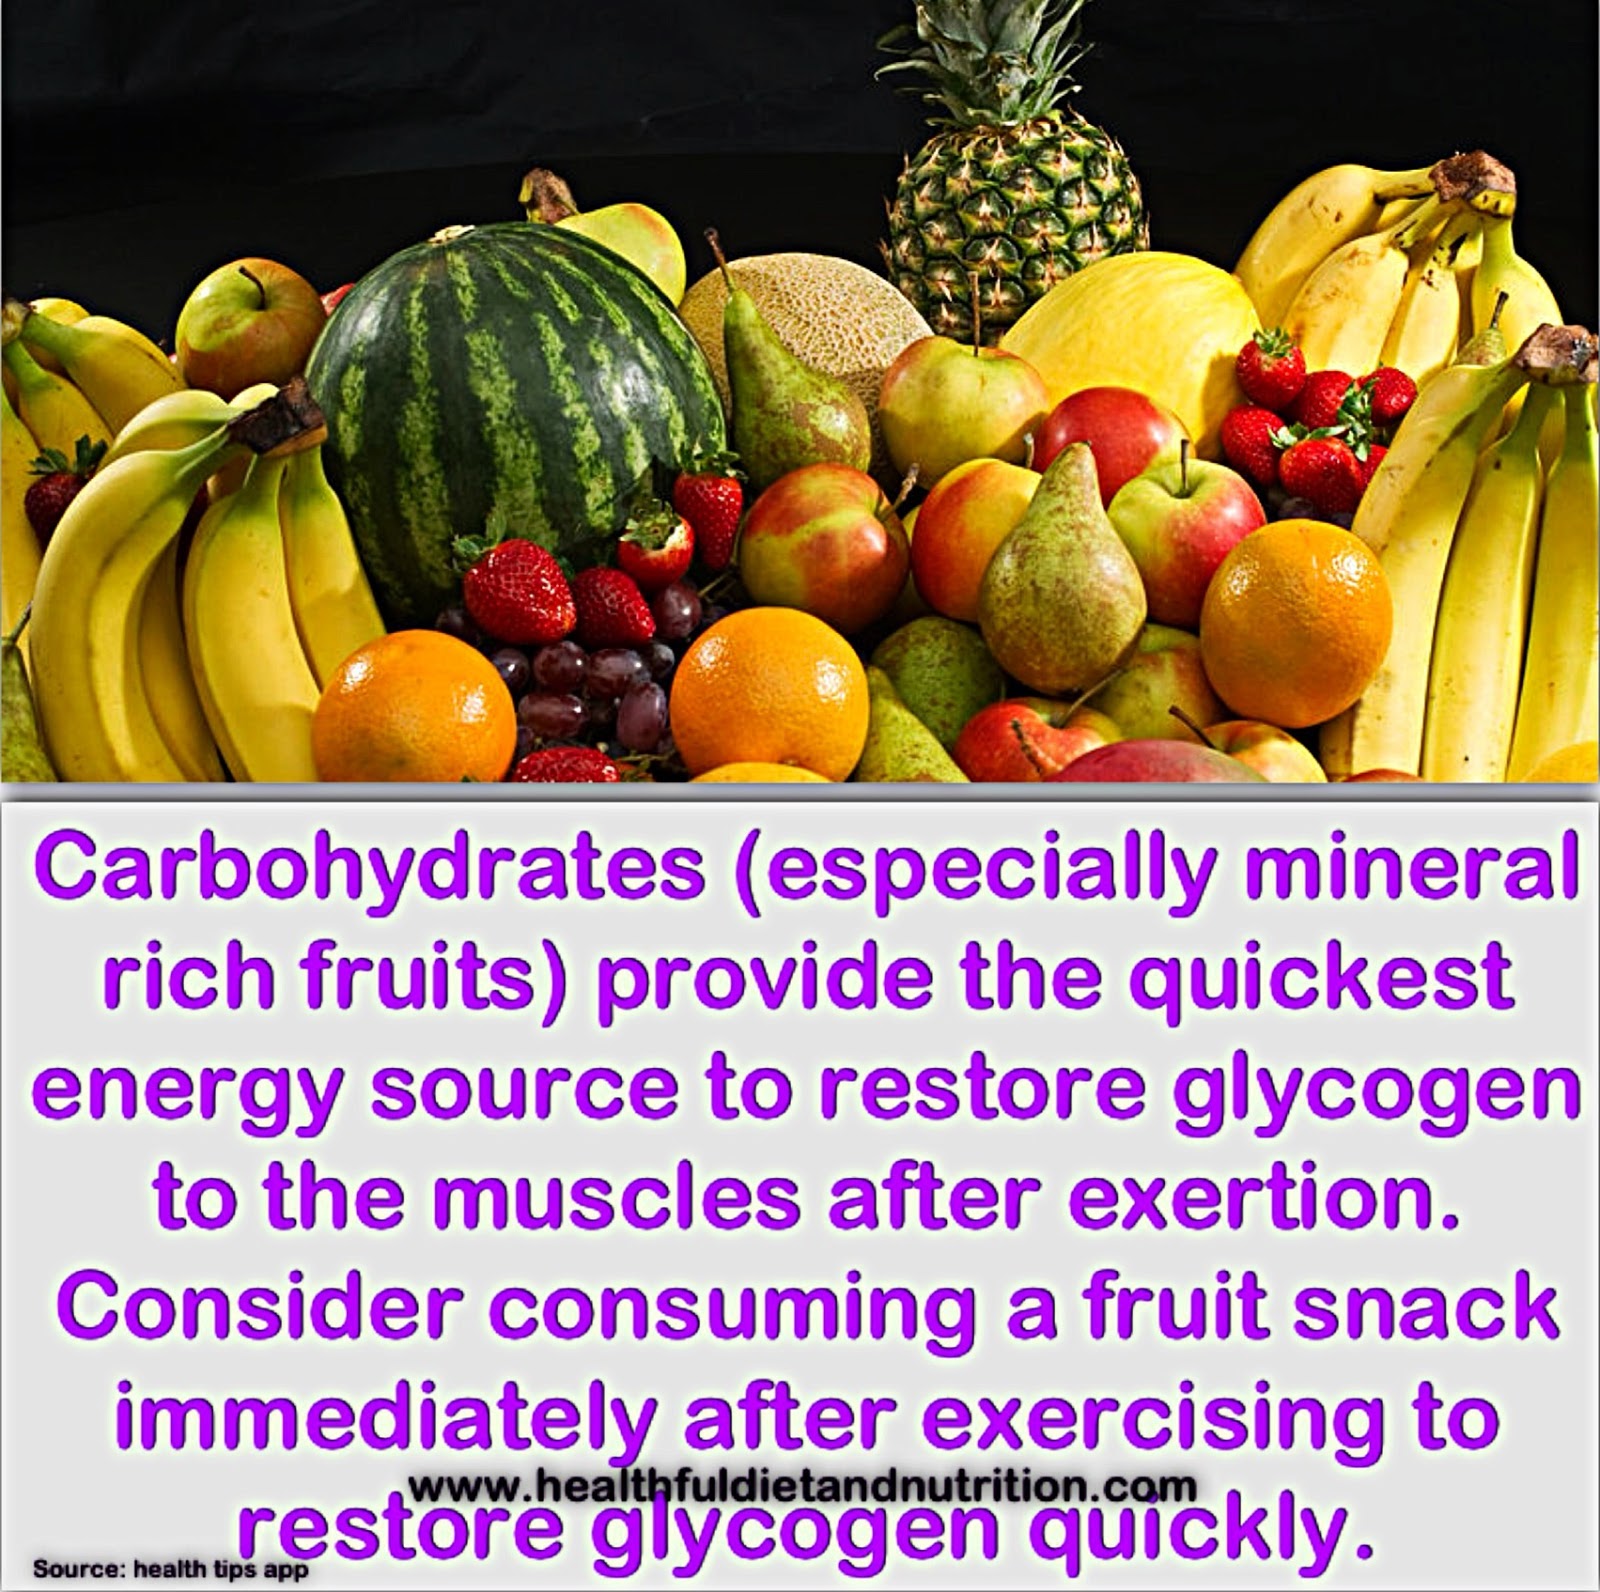 Benefits of Carbohydrates